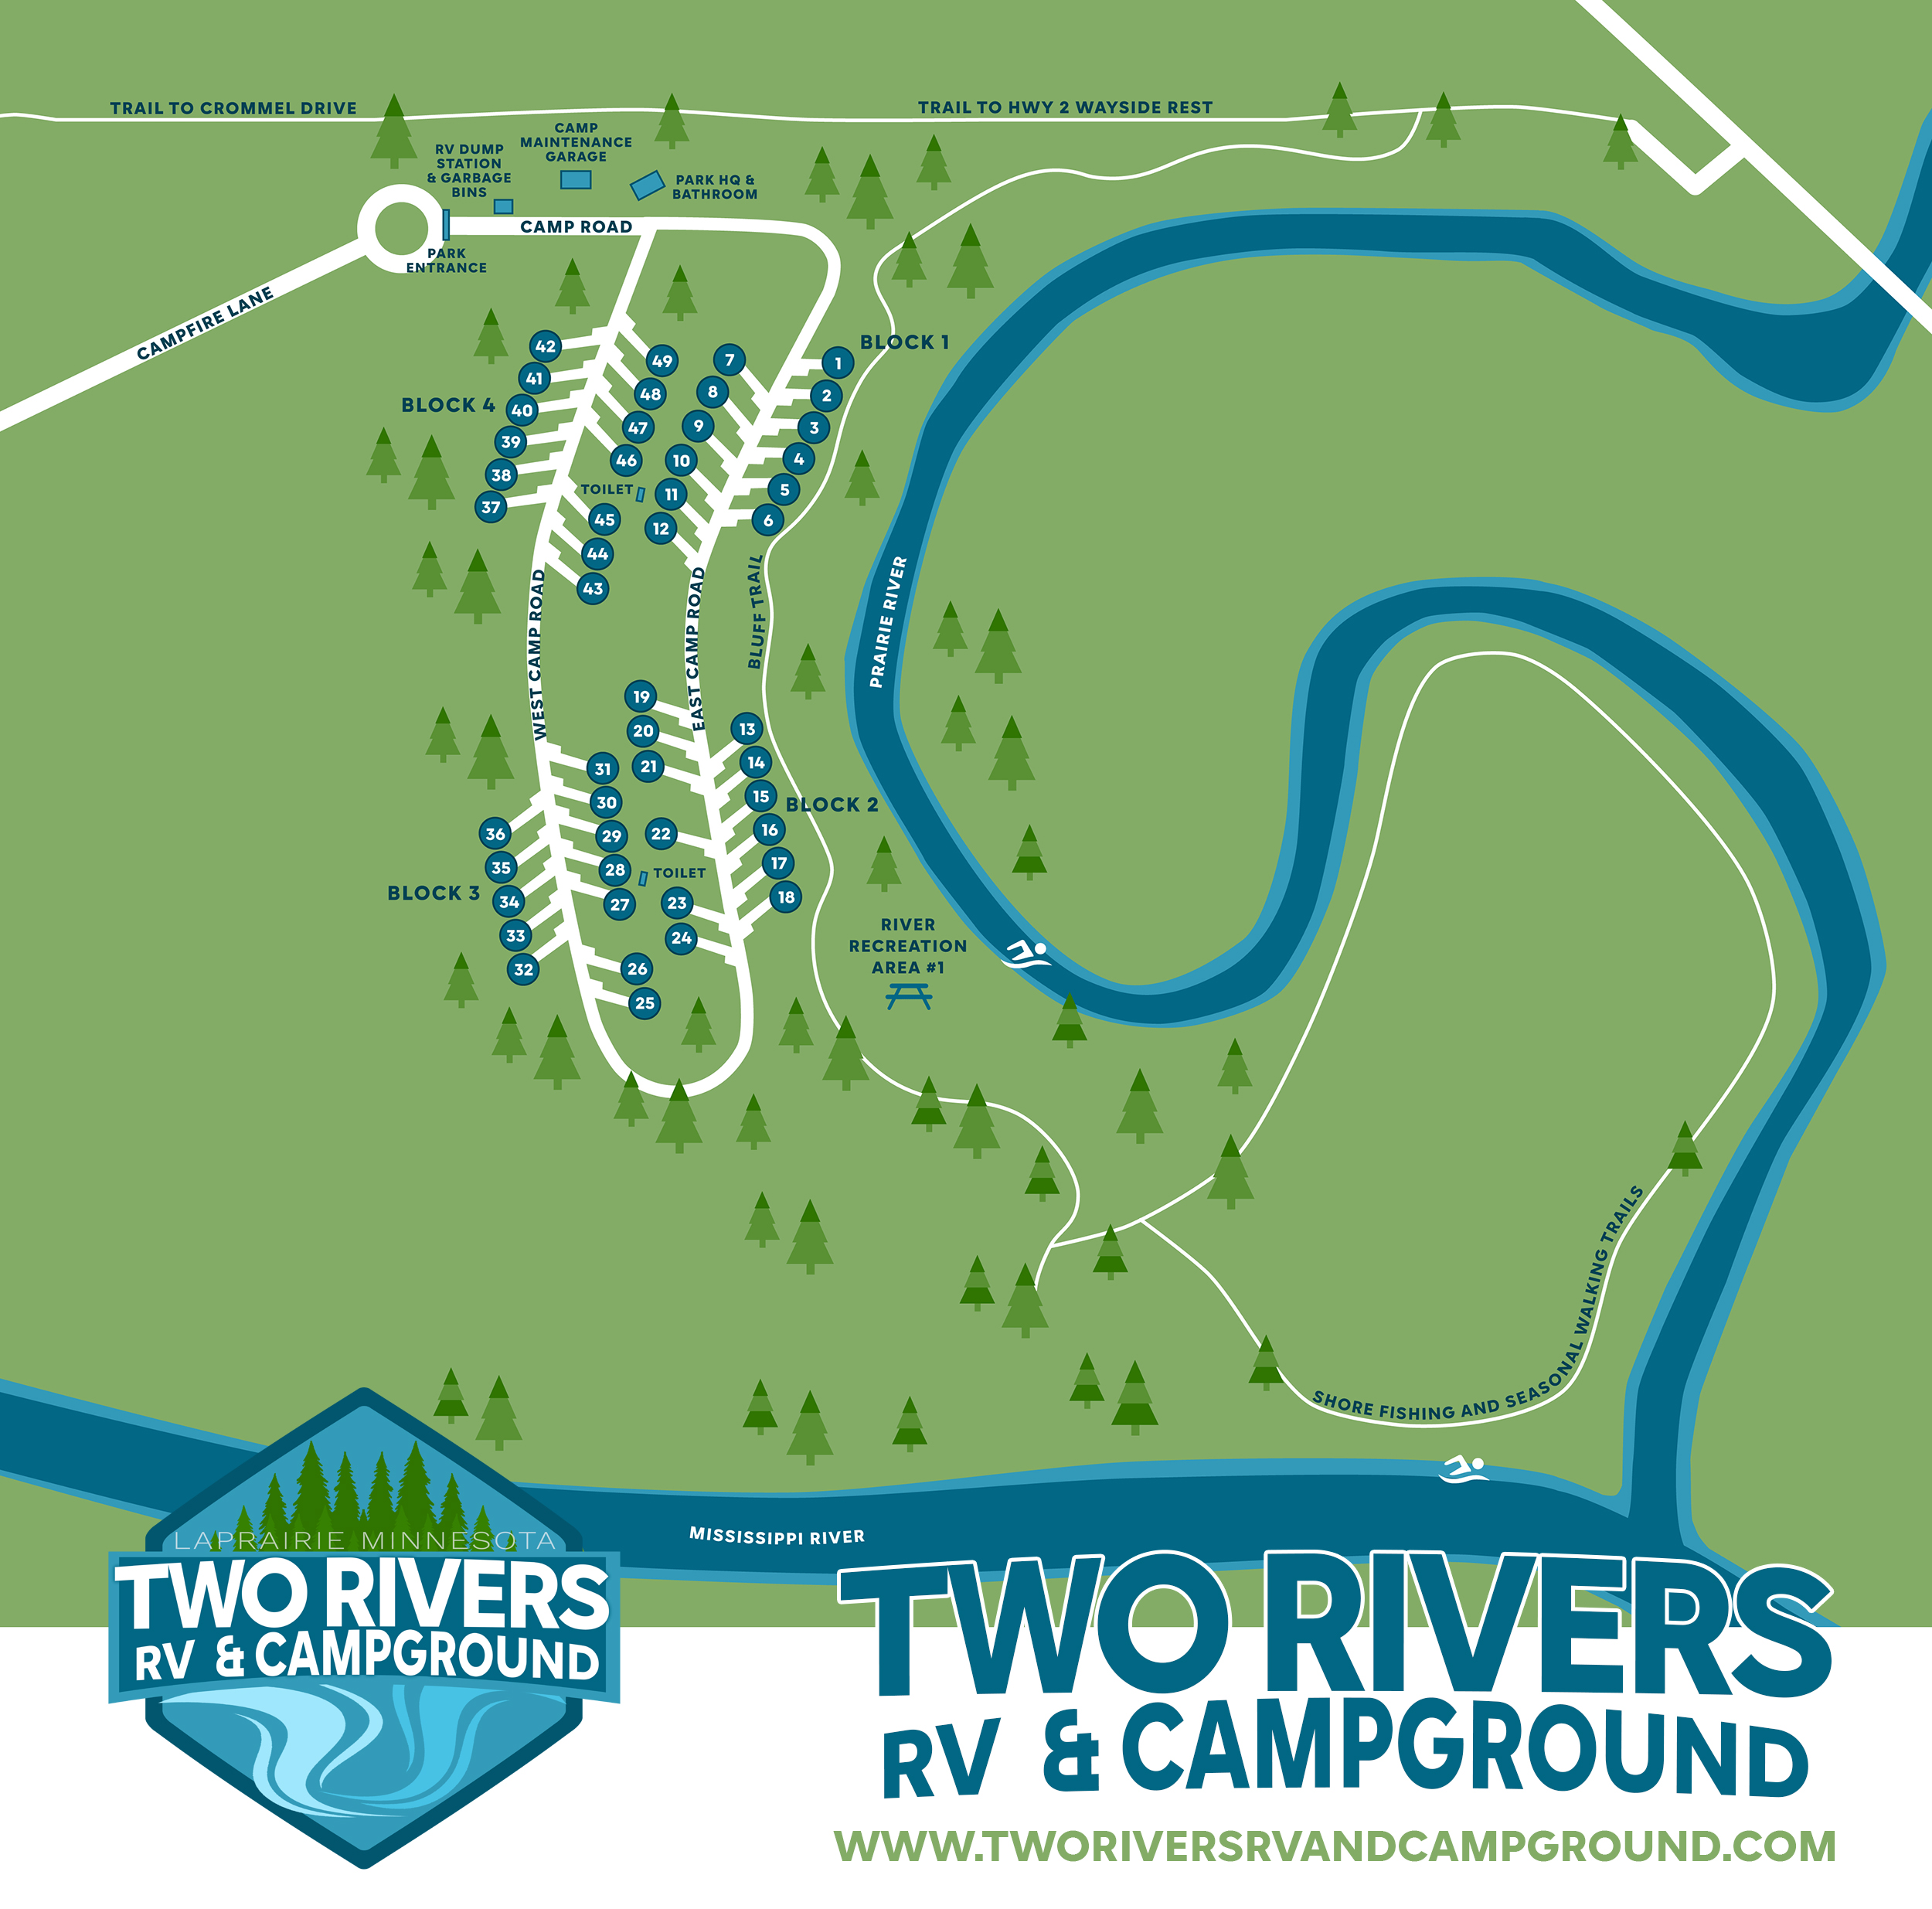 Two Rivers RV and Campground